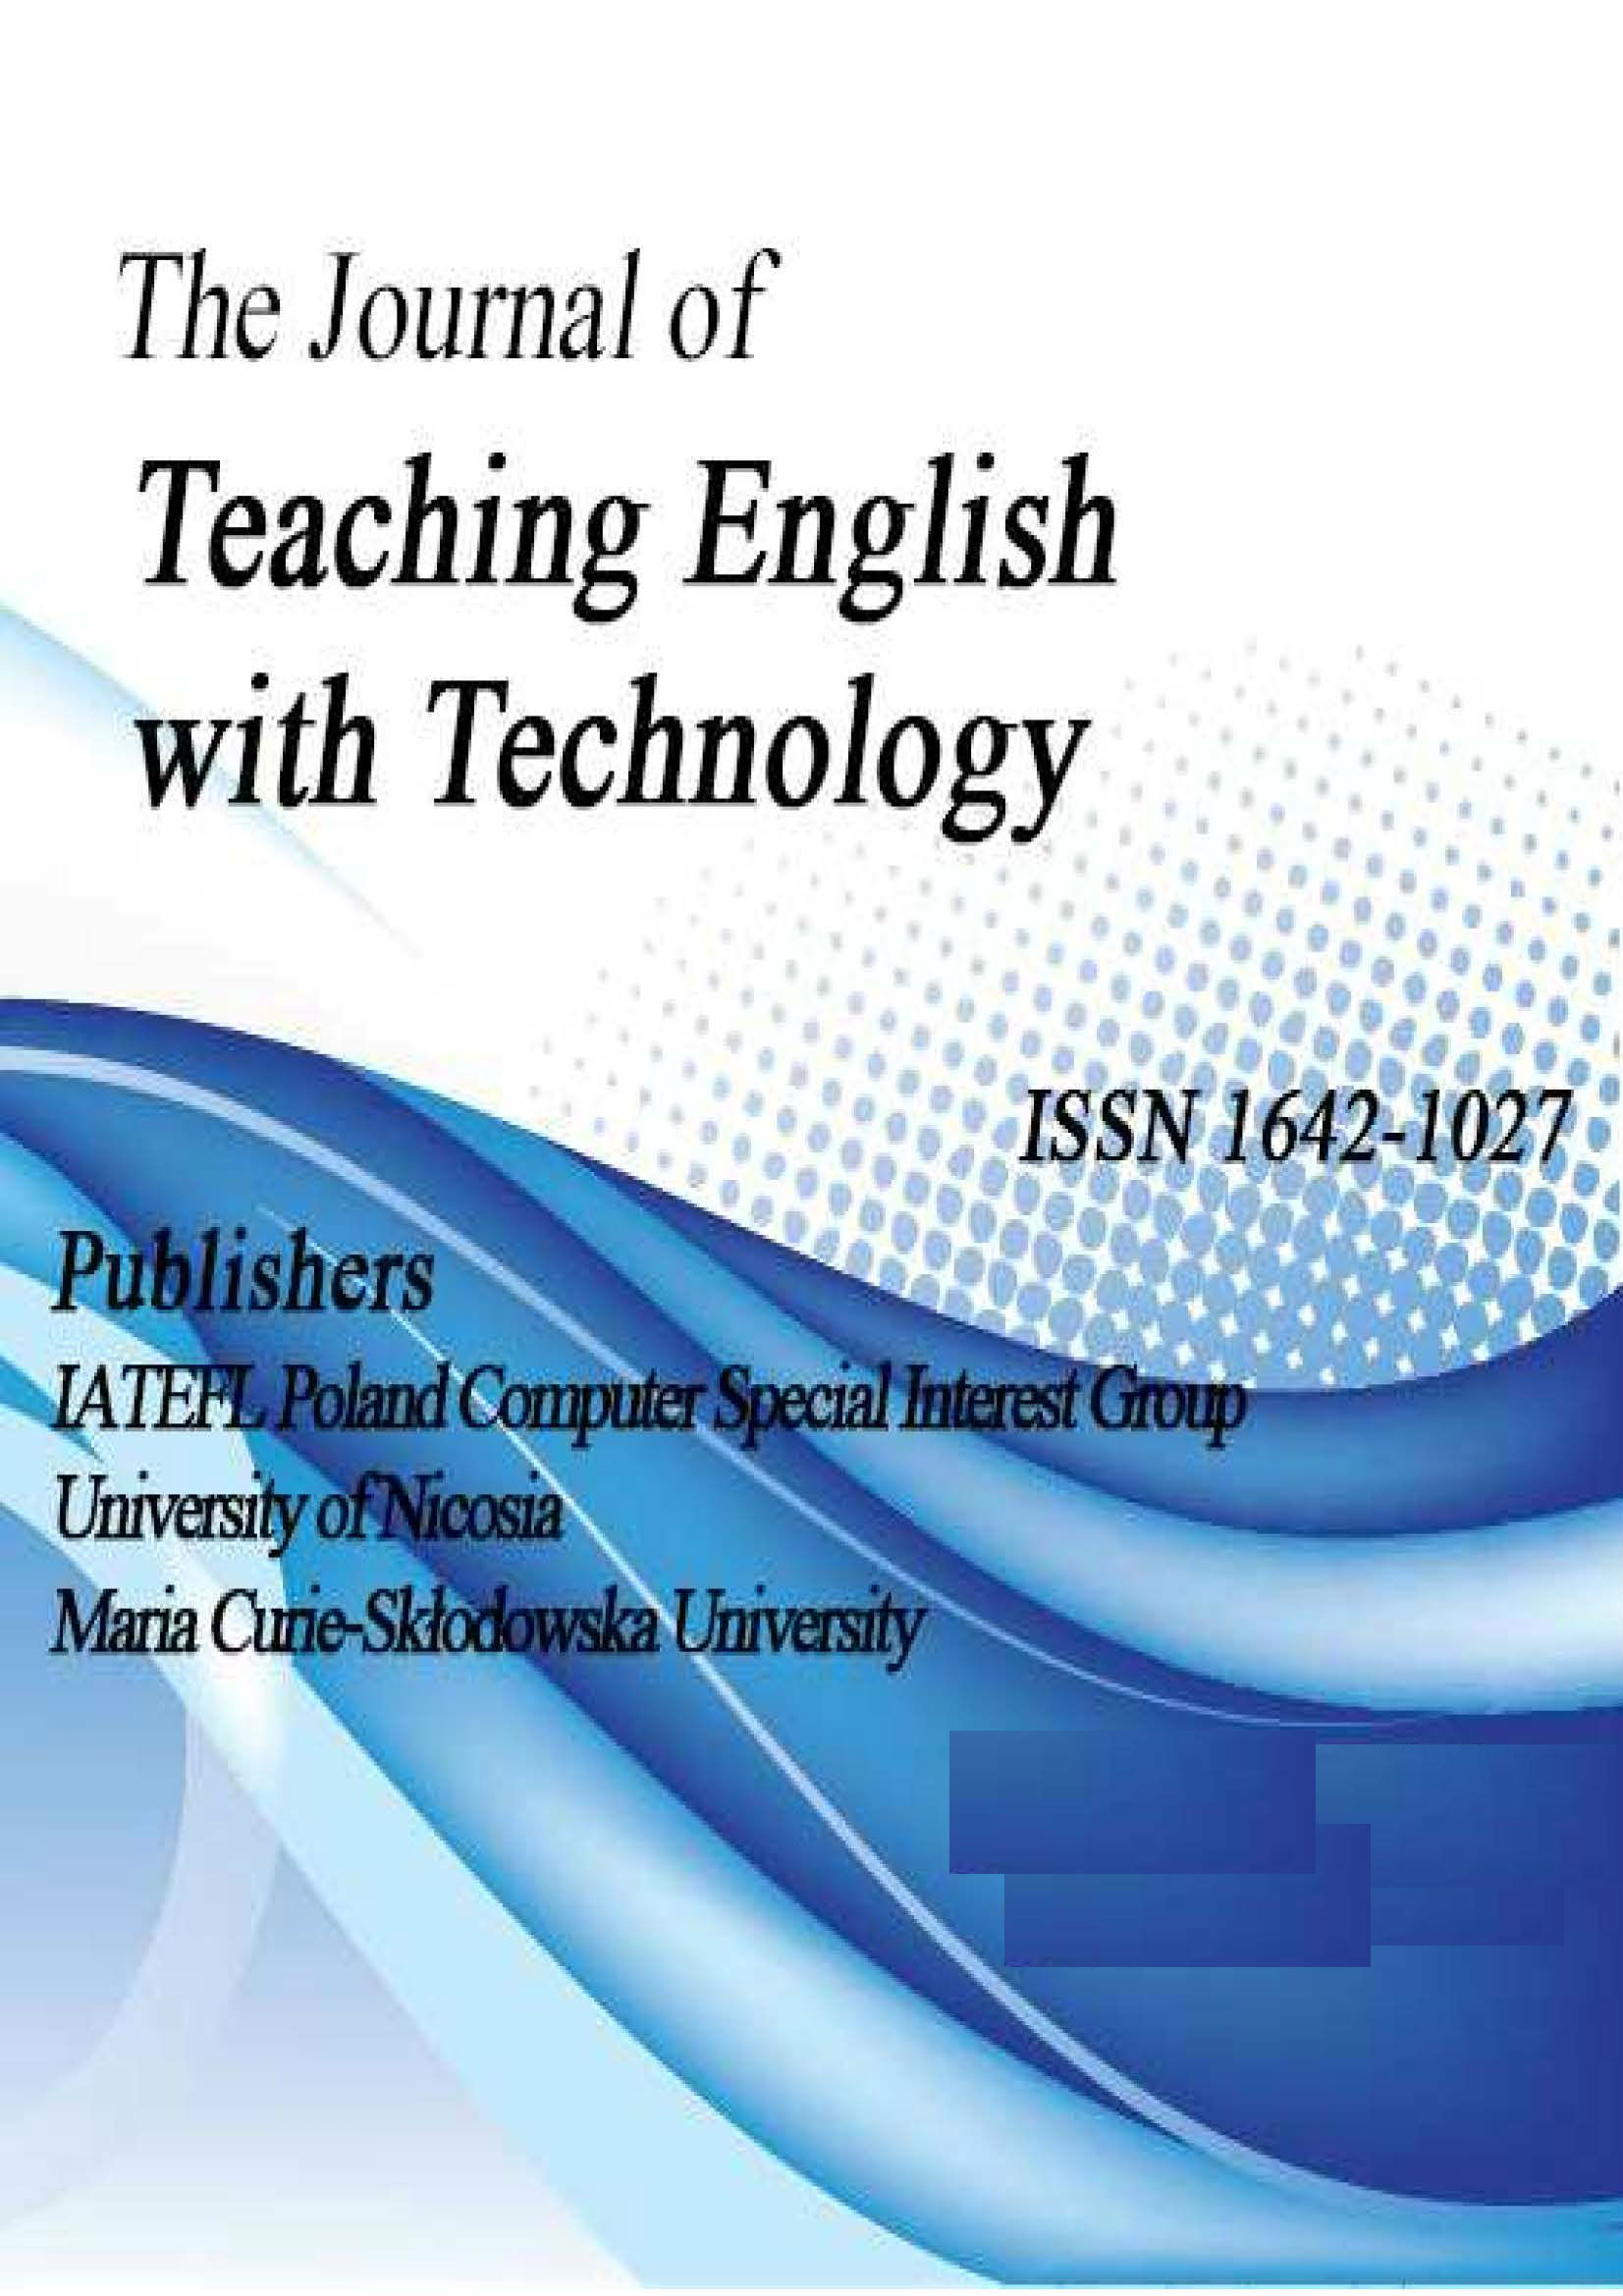 EAPQUEST AS A MODIFIED VERSION OF WEBQUEST IN THE CONTEXT OF UNIVERSITY TEACHING Cover Image